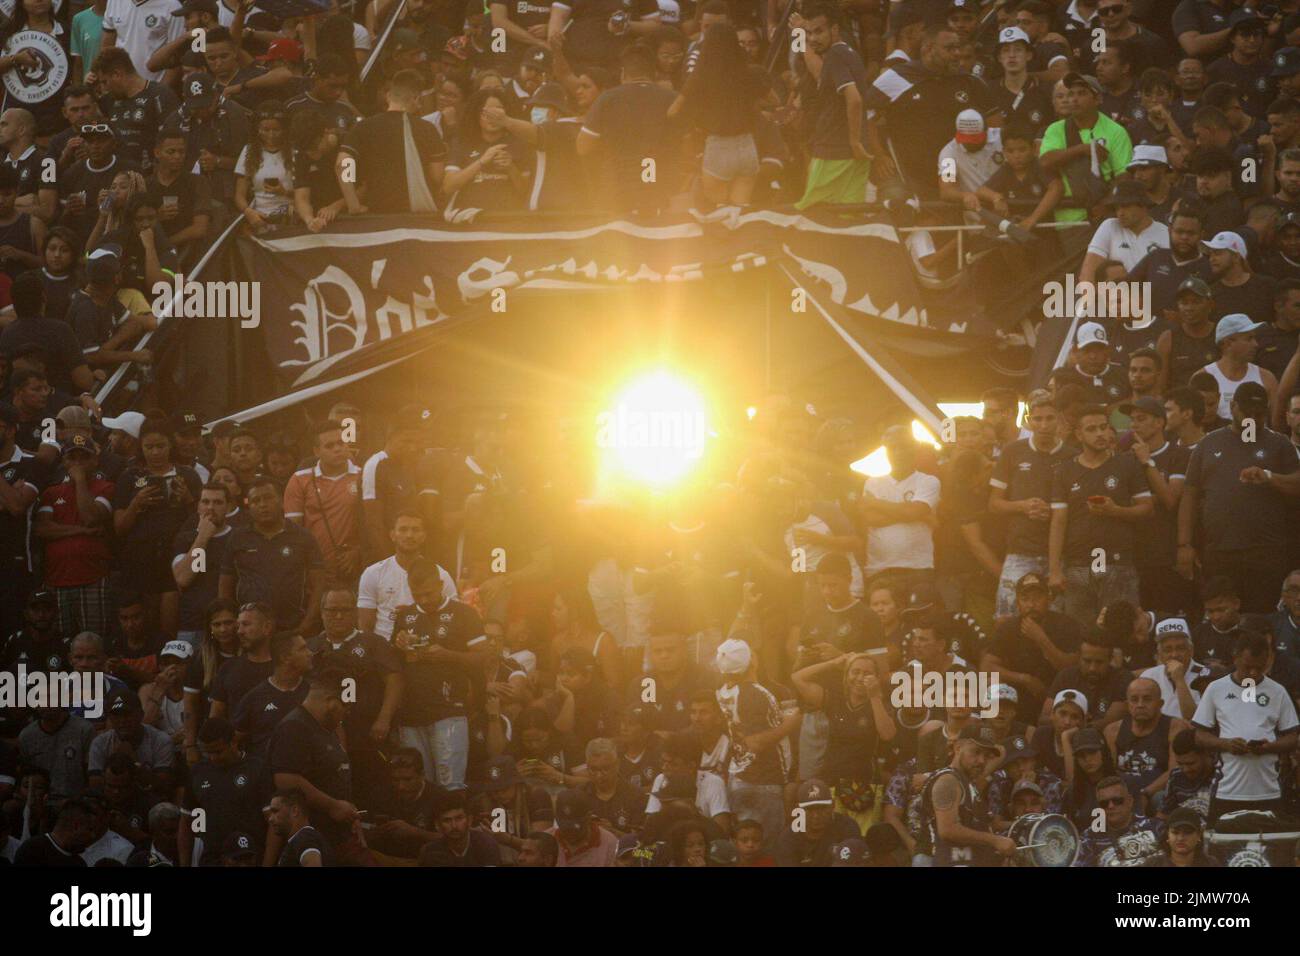 Belem, Brazil. 07th Aug, 2022. PA - Belem - 07/08/2022 - BRAZILIAN C 2022, REMO X APARECIDENSE - Supporters during a match between Remo and Aparecidense at the Baenao stadium for the Brazilian championship C 2022. Photo: Fernando Torres/AGIF/Sipa USA Credit: Sipa USA/Alamy Live News Stock Photo